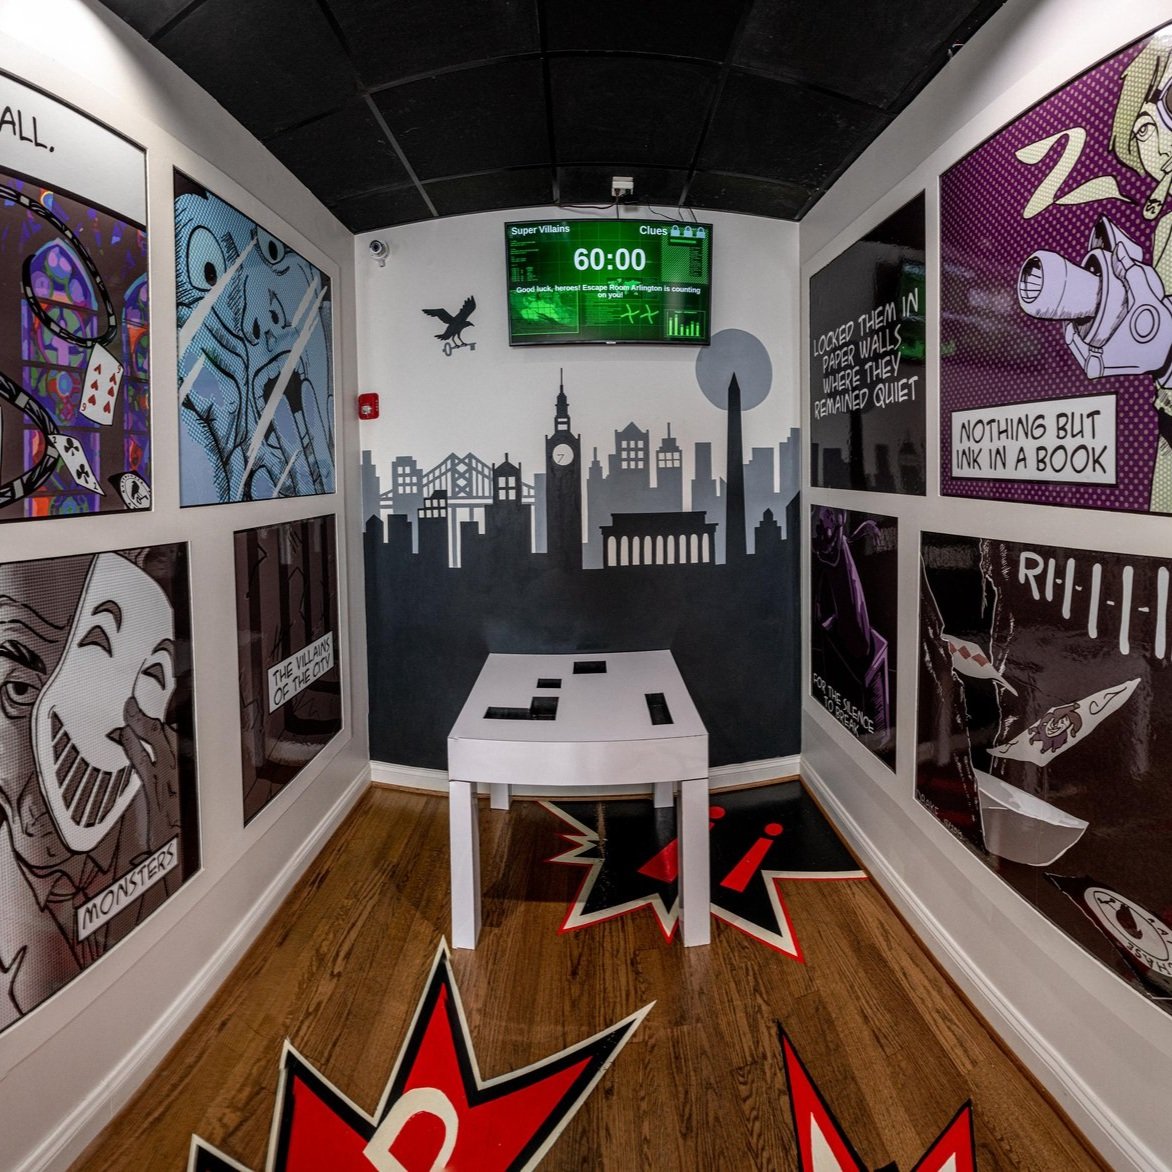 Check Out These Fun Escape Rooms in Columbia